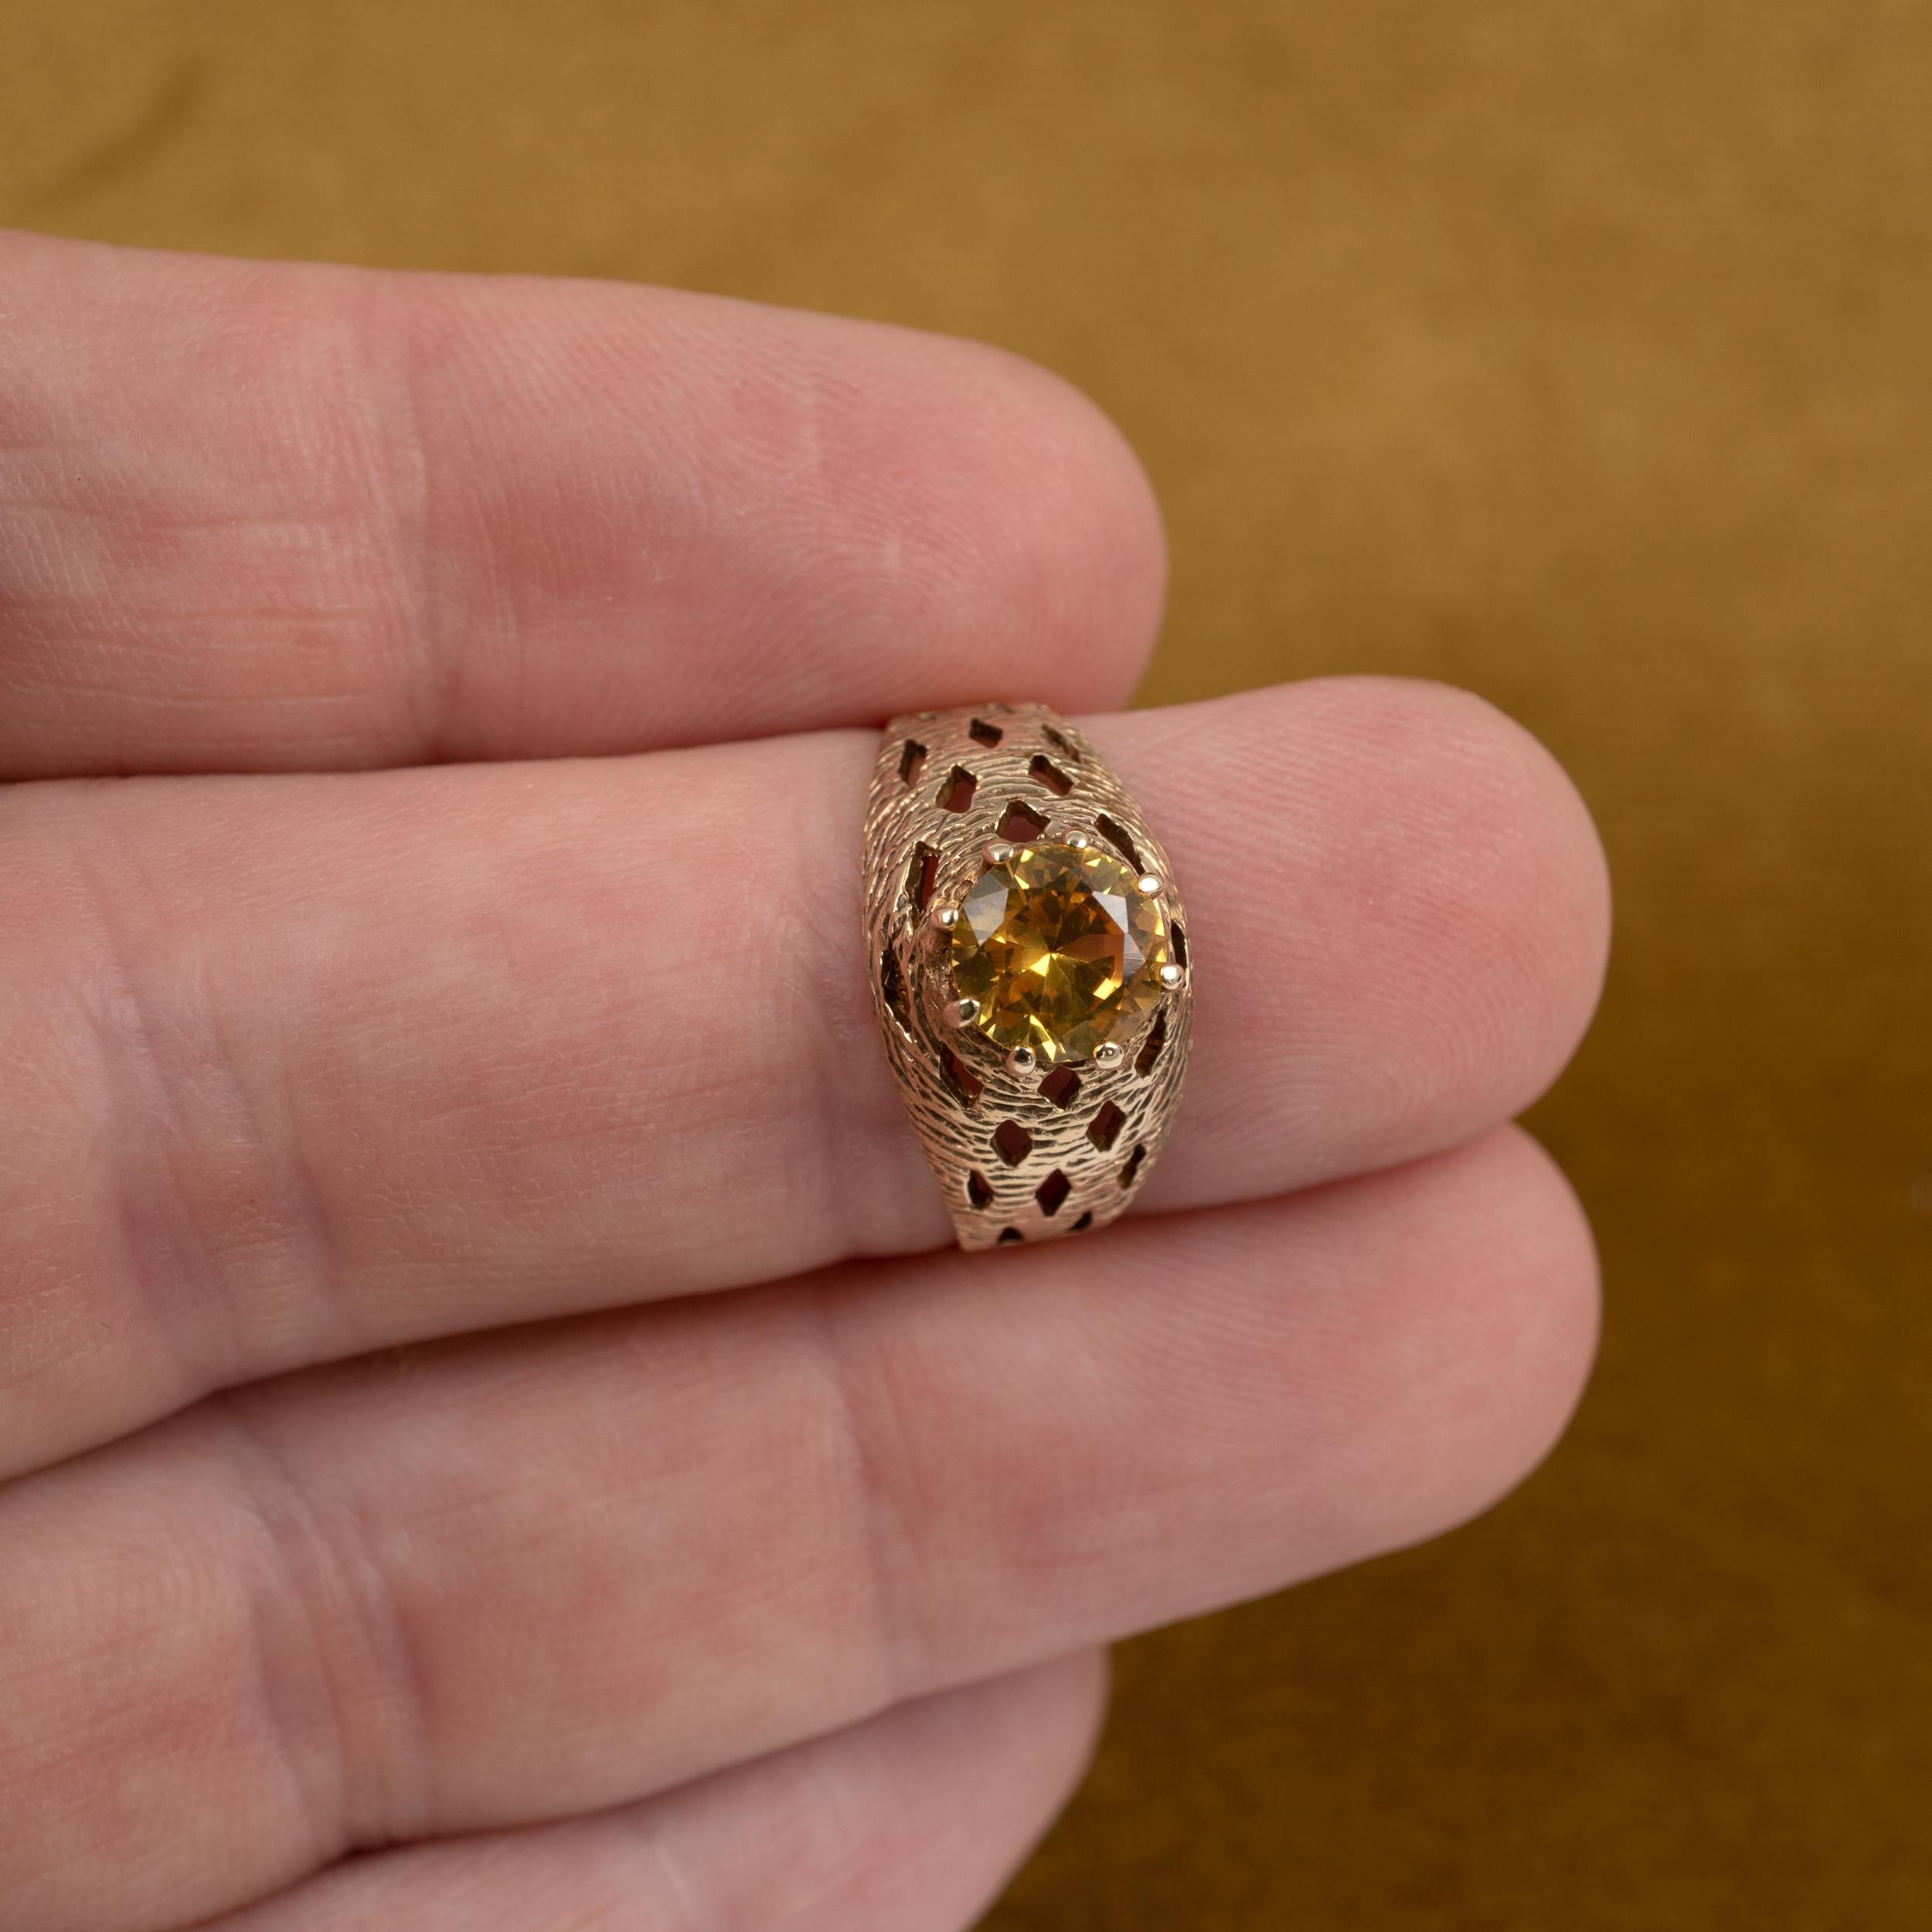 Vintage 19780s Chunky Citrine Solitaire Ring 9 Karat Gold Hallmark Dated 1974 For Sale 4